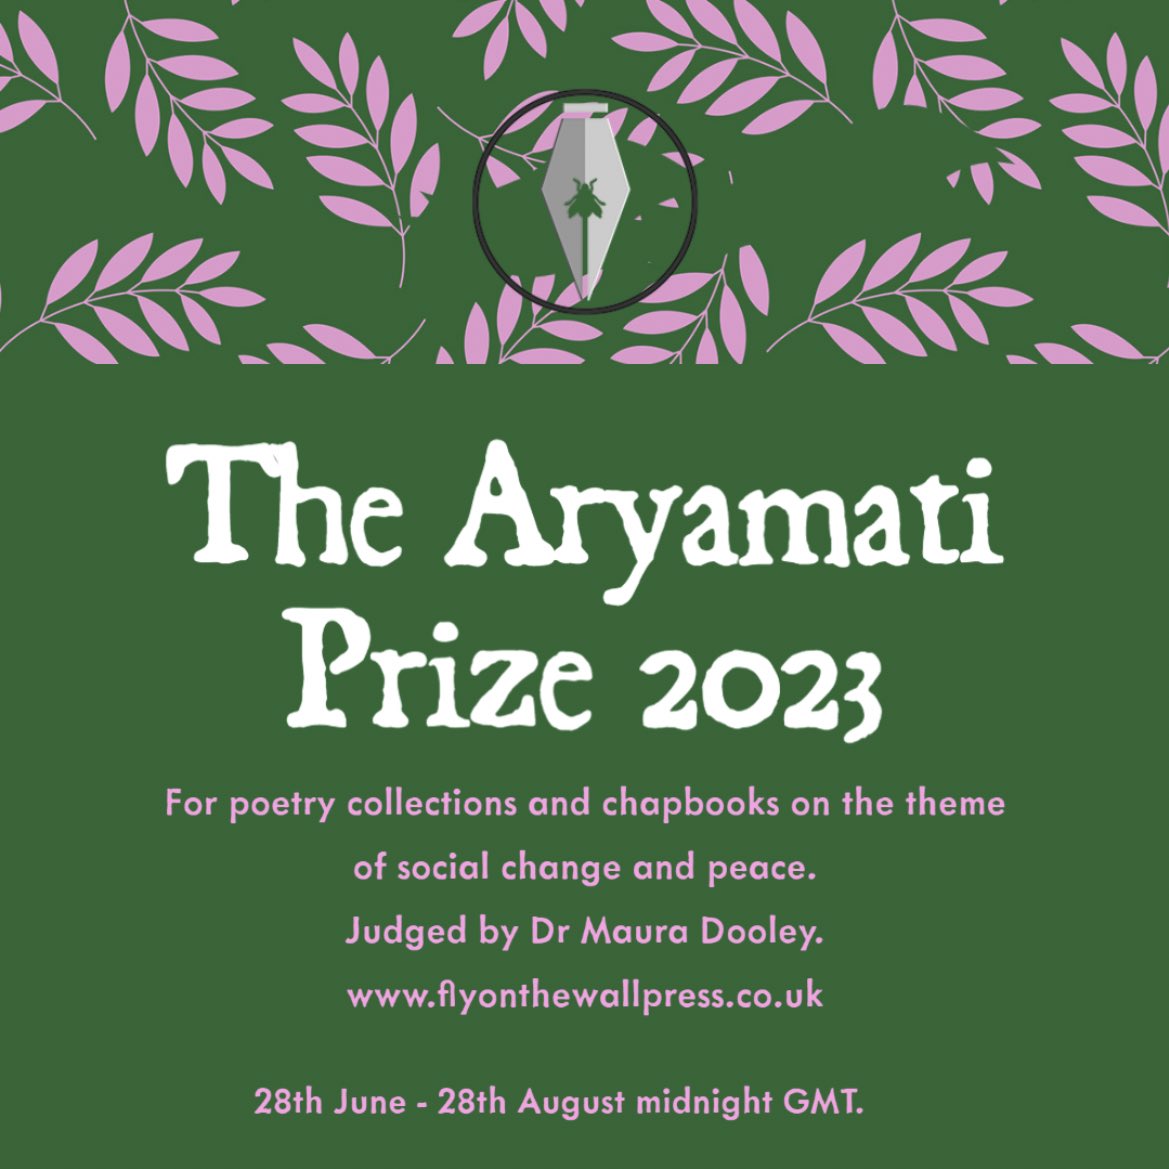 Want to be a FOTW poet in 2024? The Aryamati Prize 2023 is open to entries until 28th August - find out more here! Peace and social change poetry. flyonthewallpress.co.uk/the-aryamati-p…